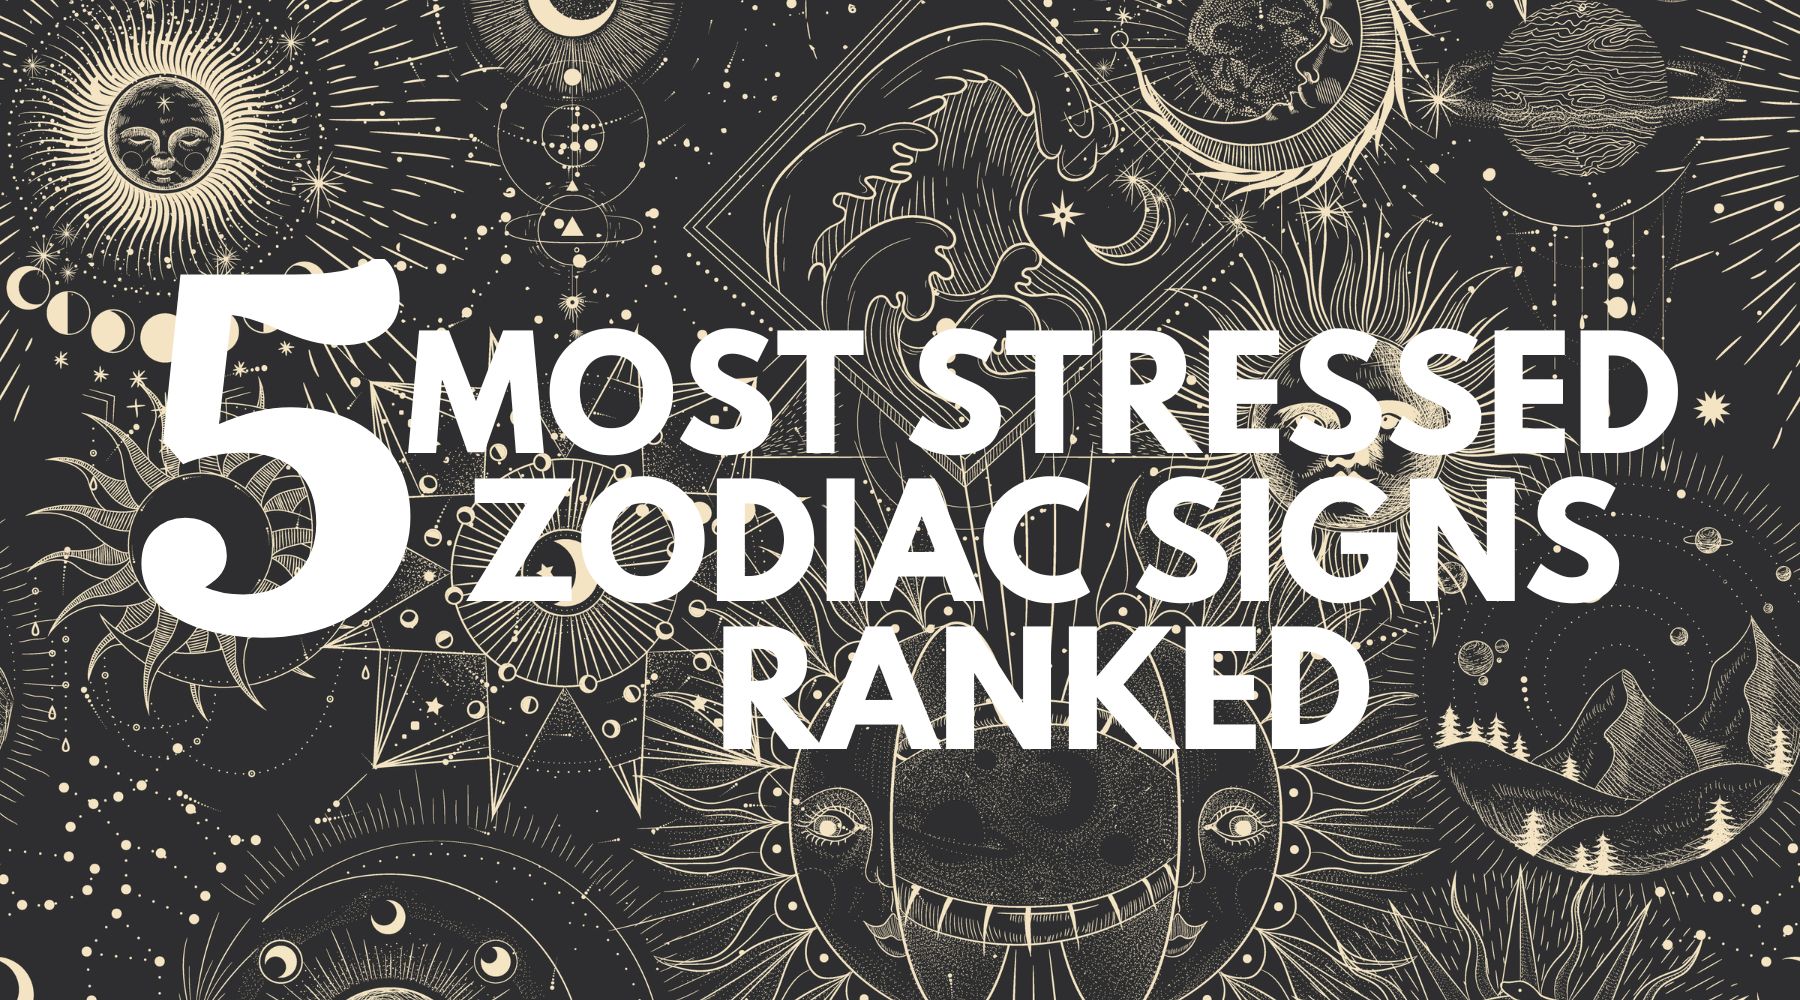 The 5 most stressed zodiac signs ranked from most stressed to least stressed